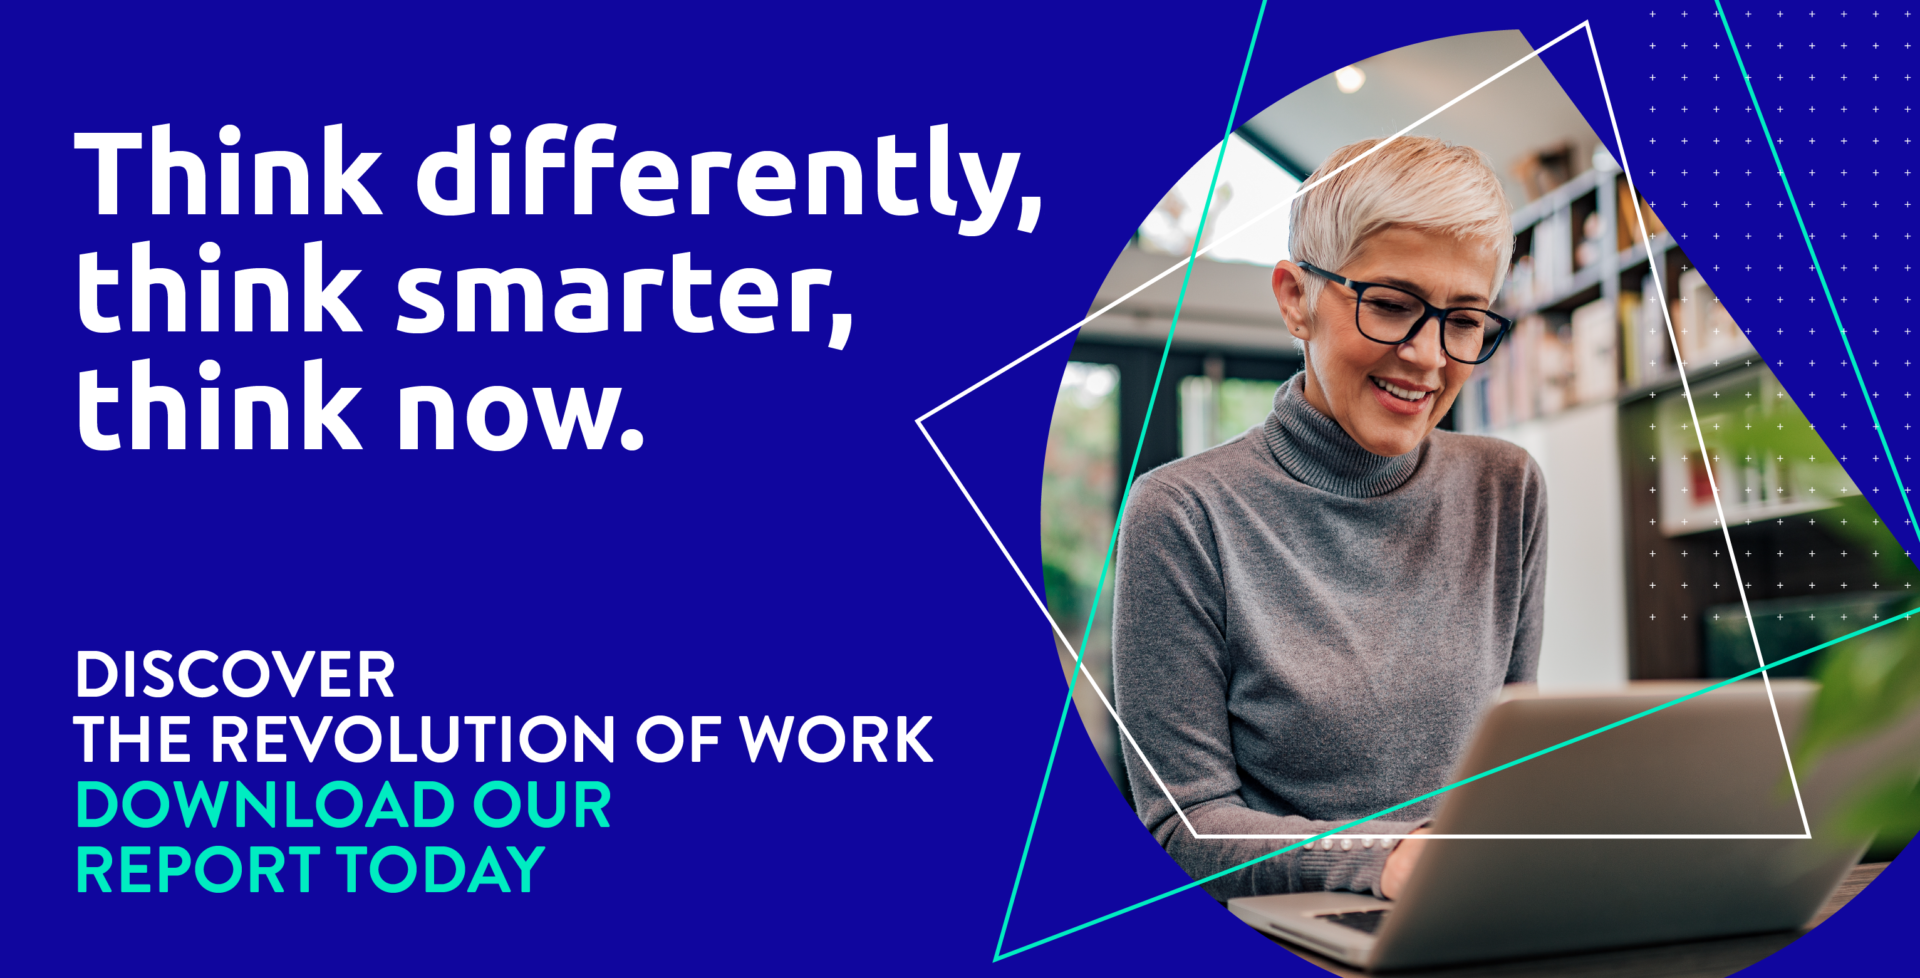 Think differently, think smarter, think now. Discover the Revolution of Work. Download our report today